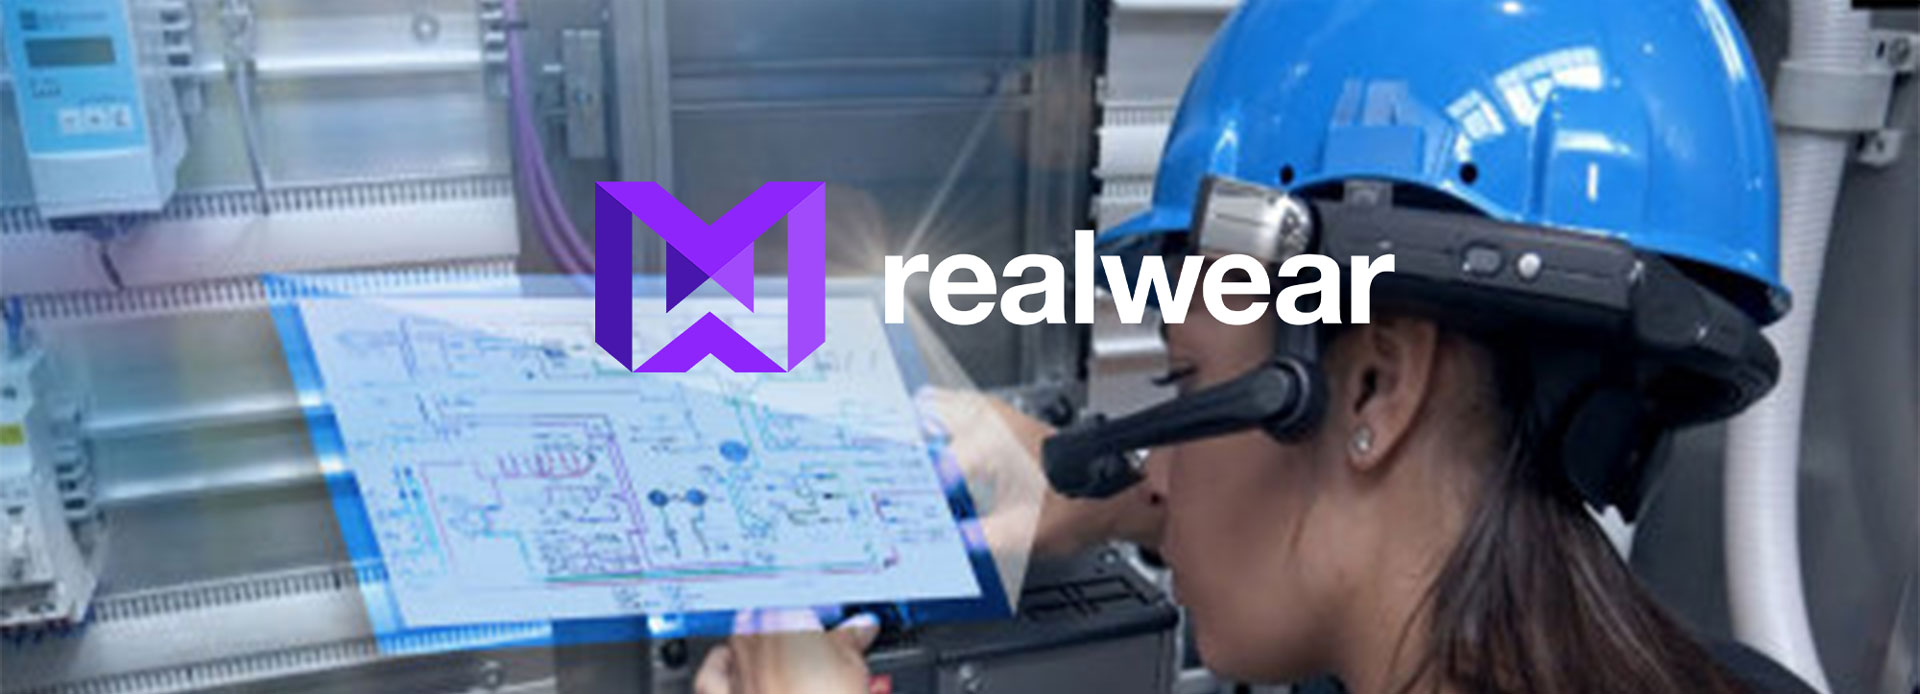 RealWear Devices